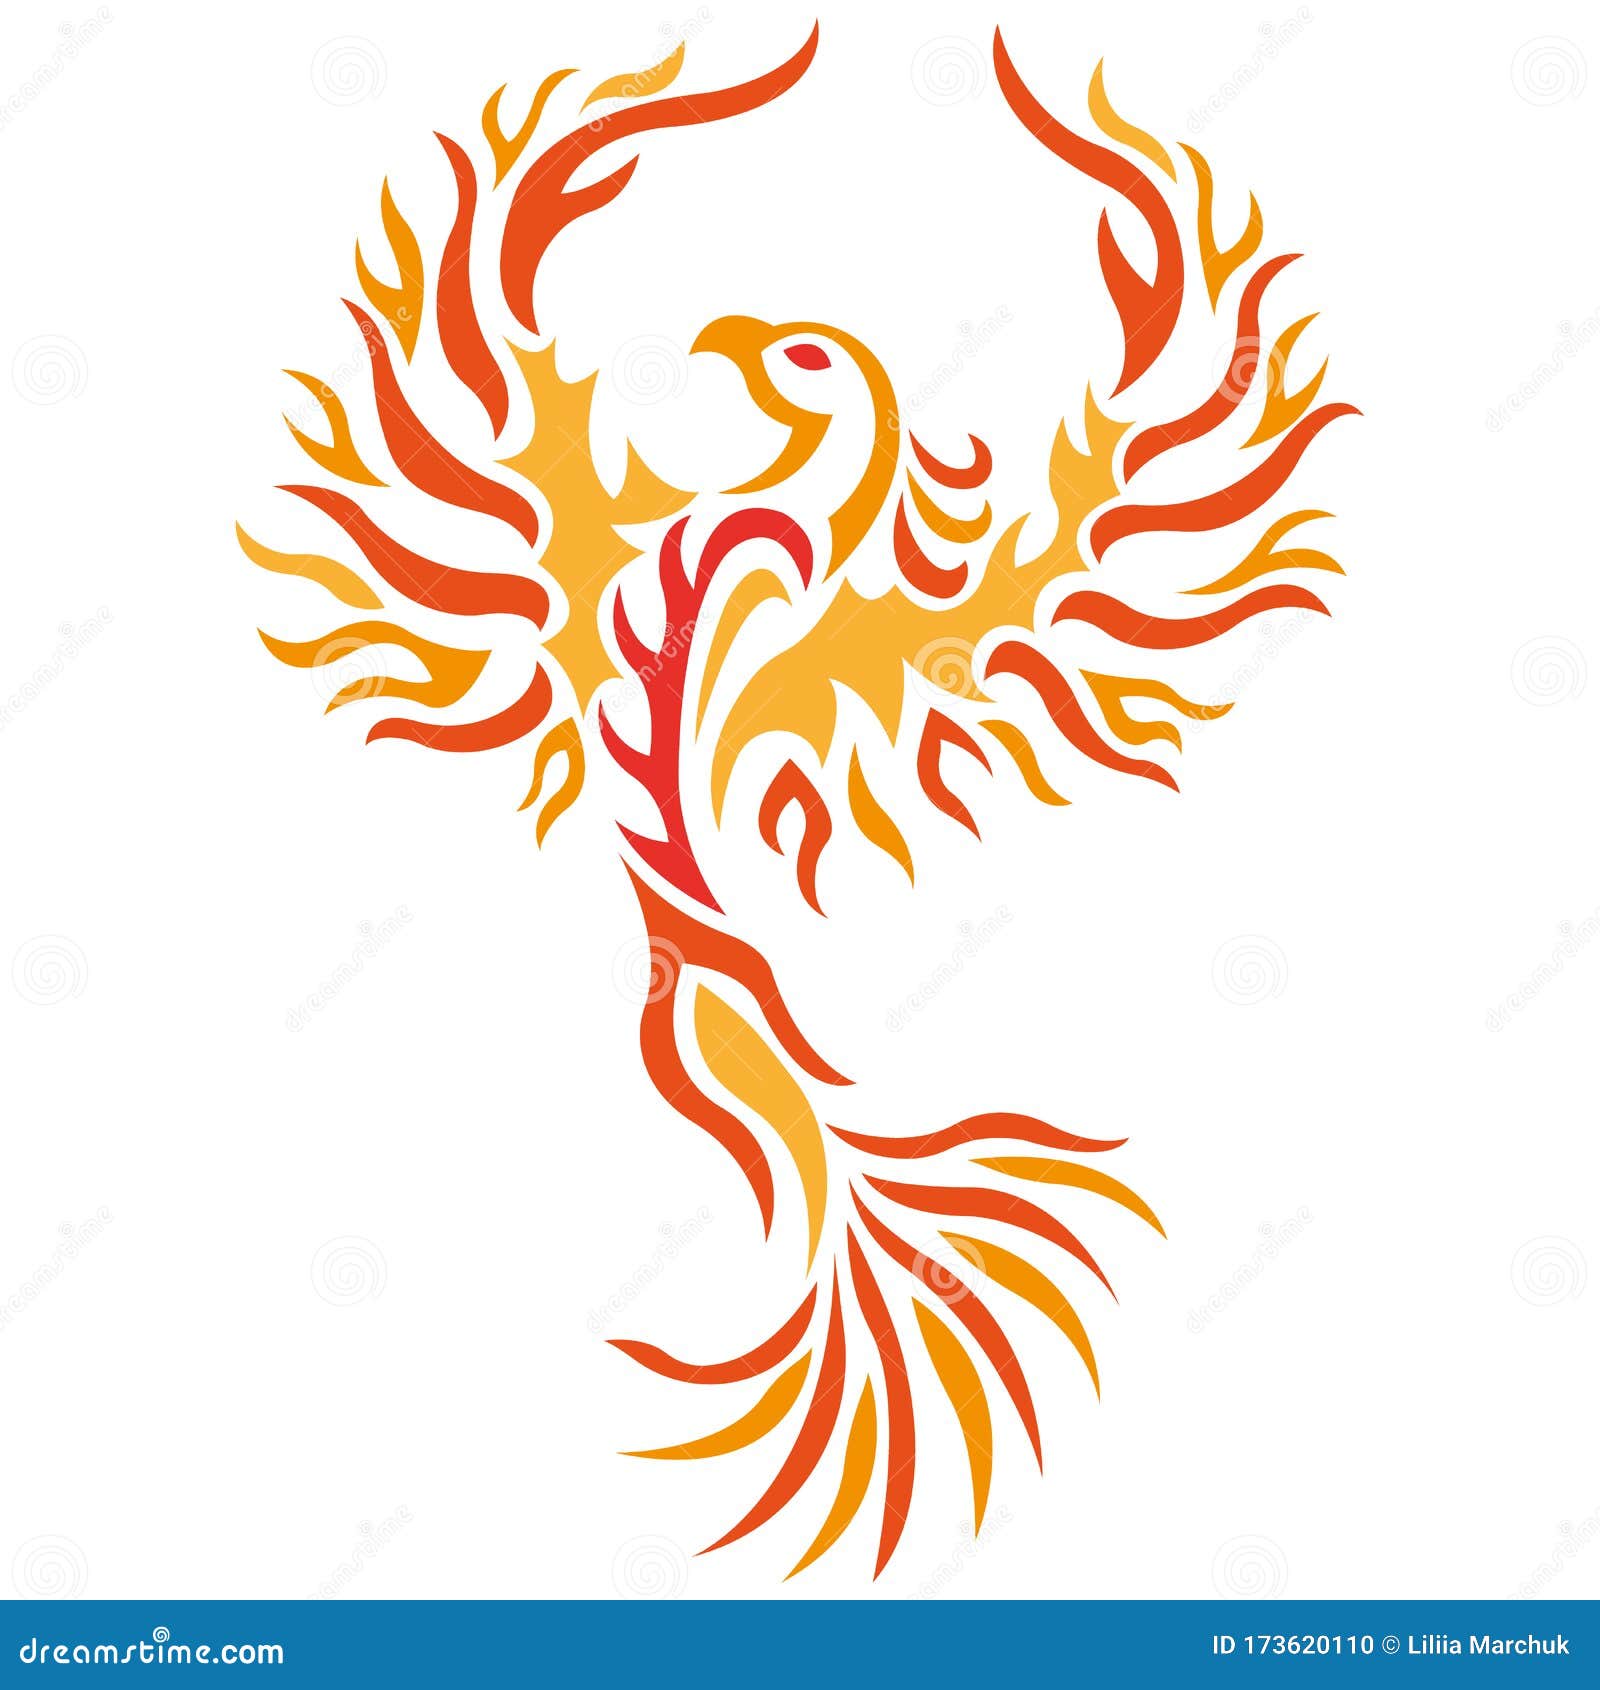 Phoenix Yellow Silhouette Drawn by Ornate Lines in a Flat Style. Tattoo ...